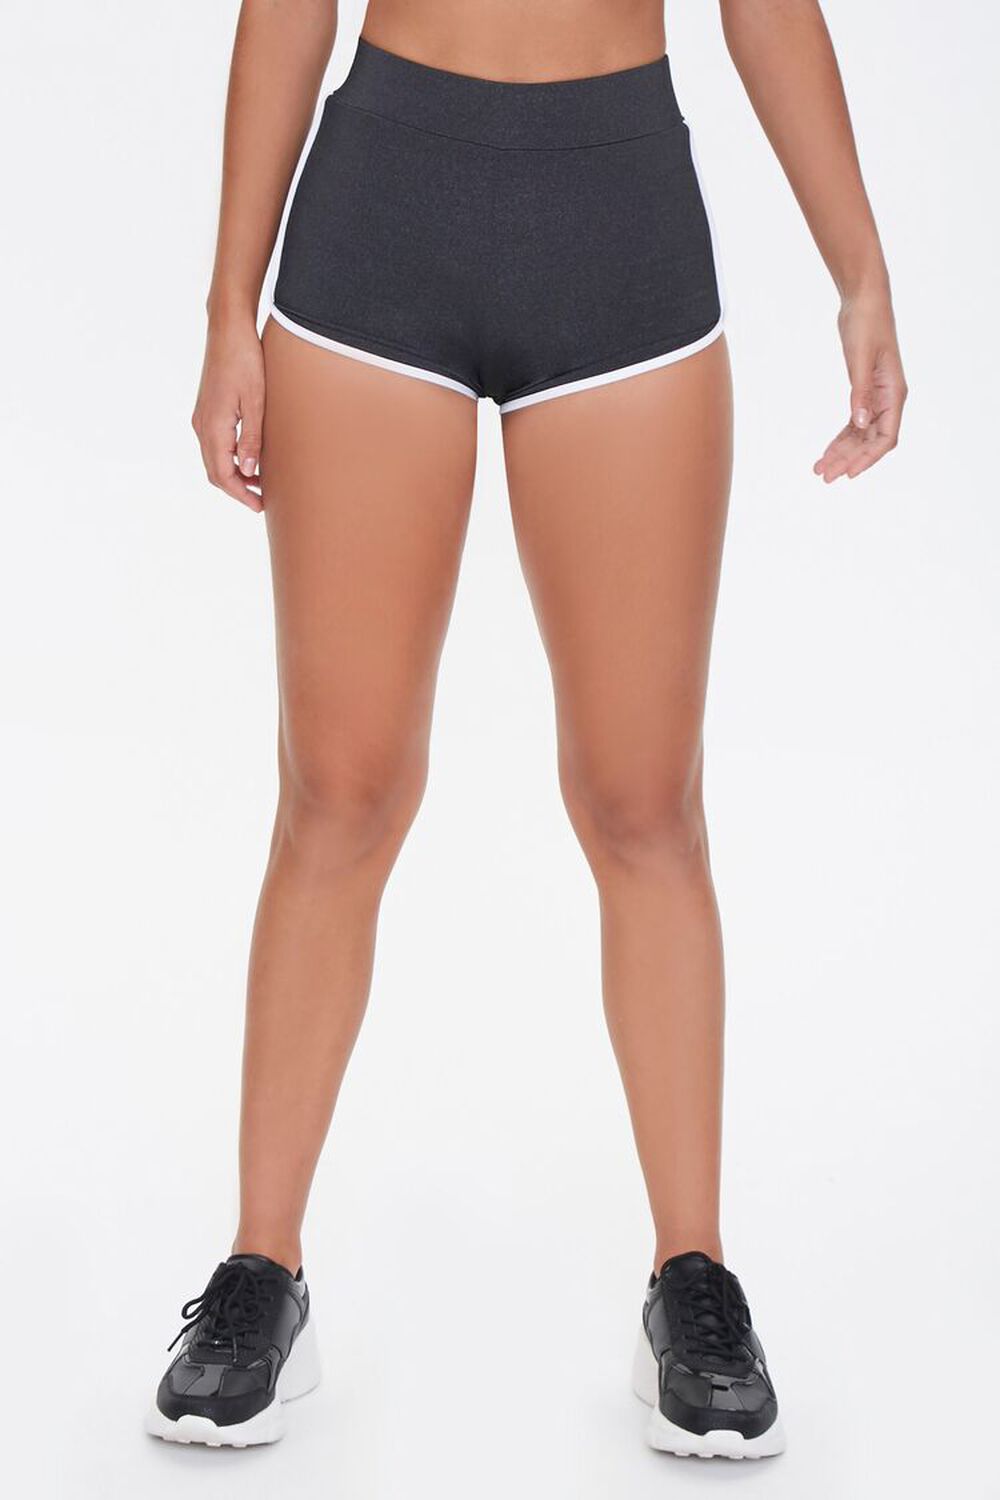 CHARCOAL/WHITE Active Dolphin Shorts, image 2